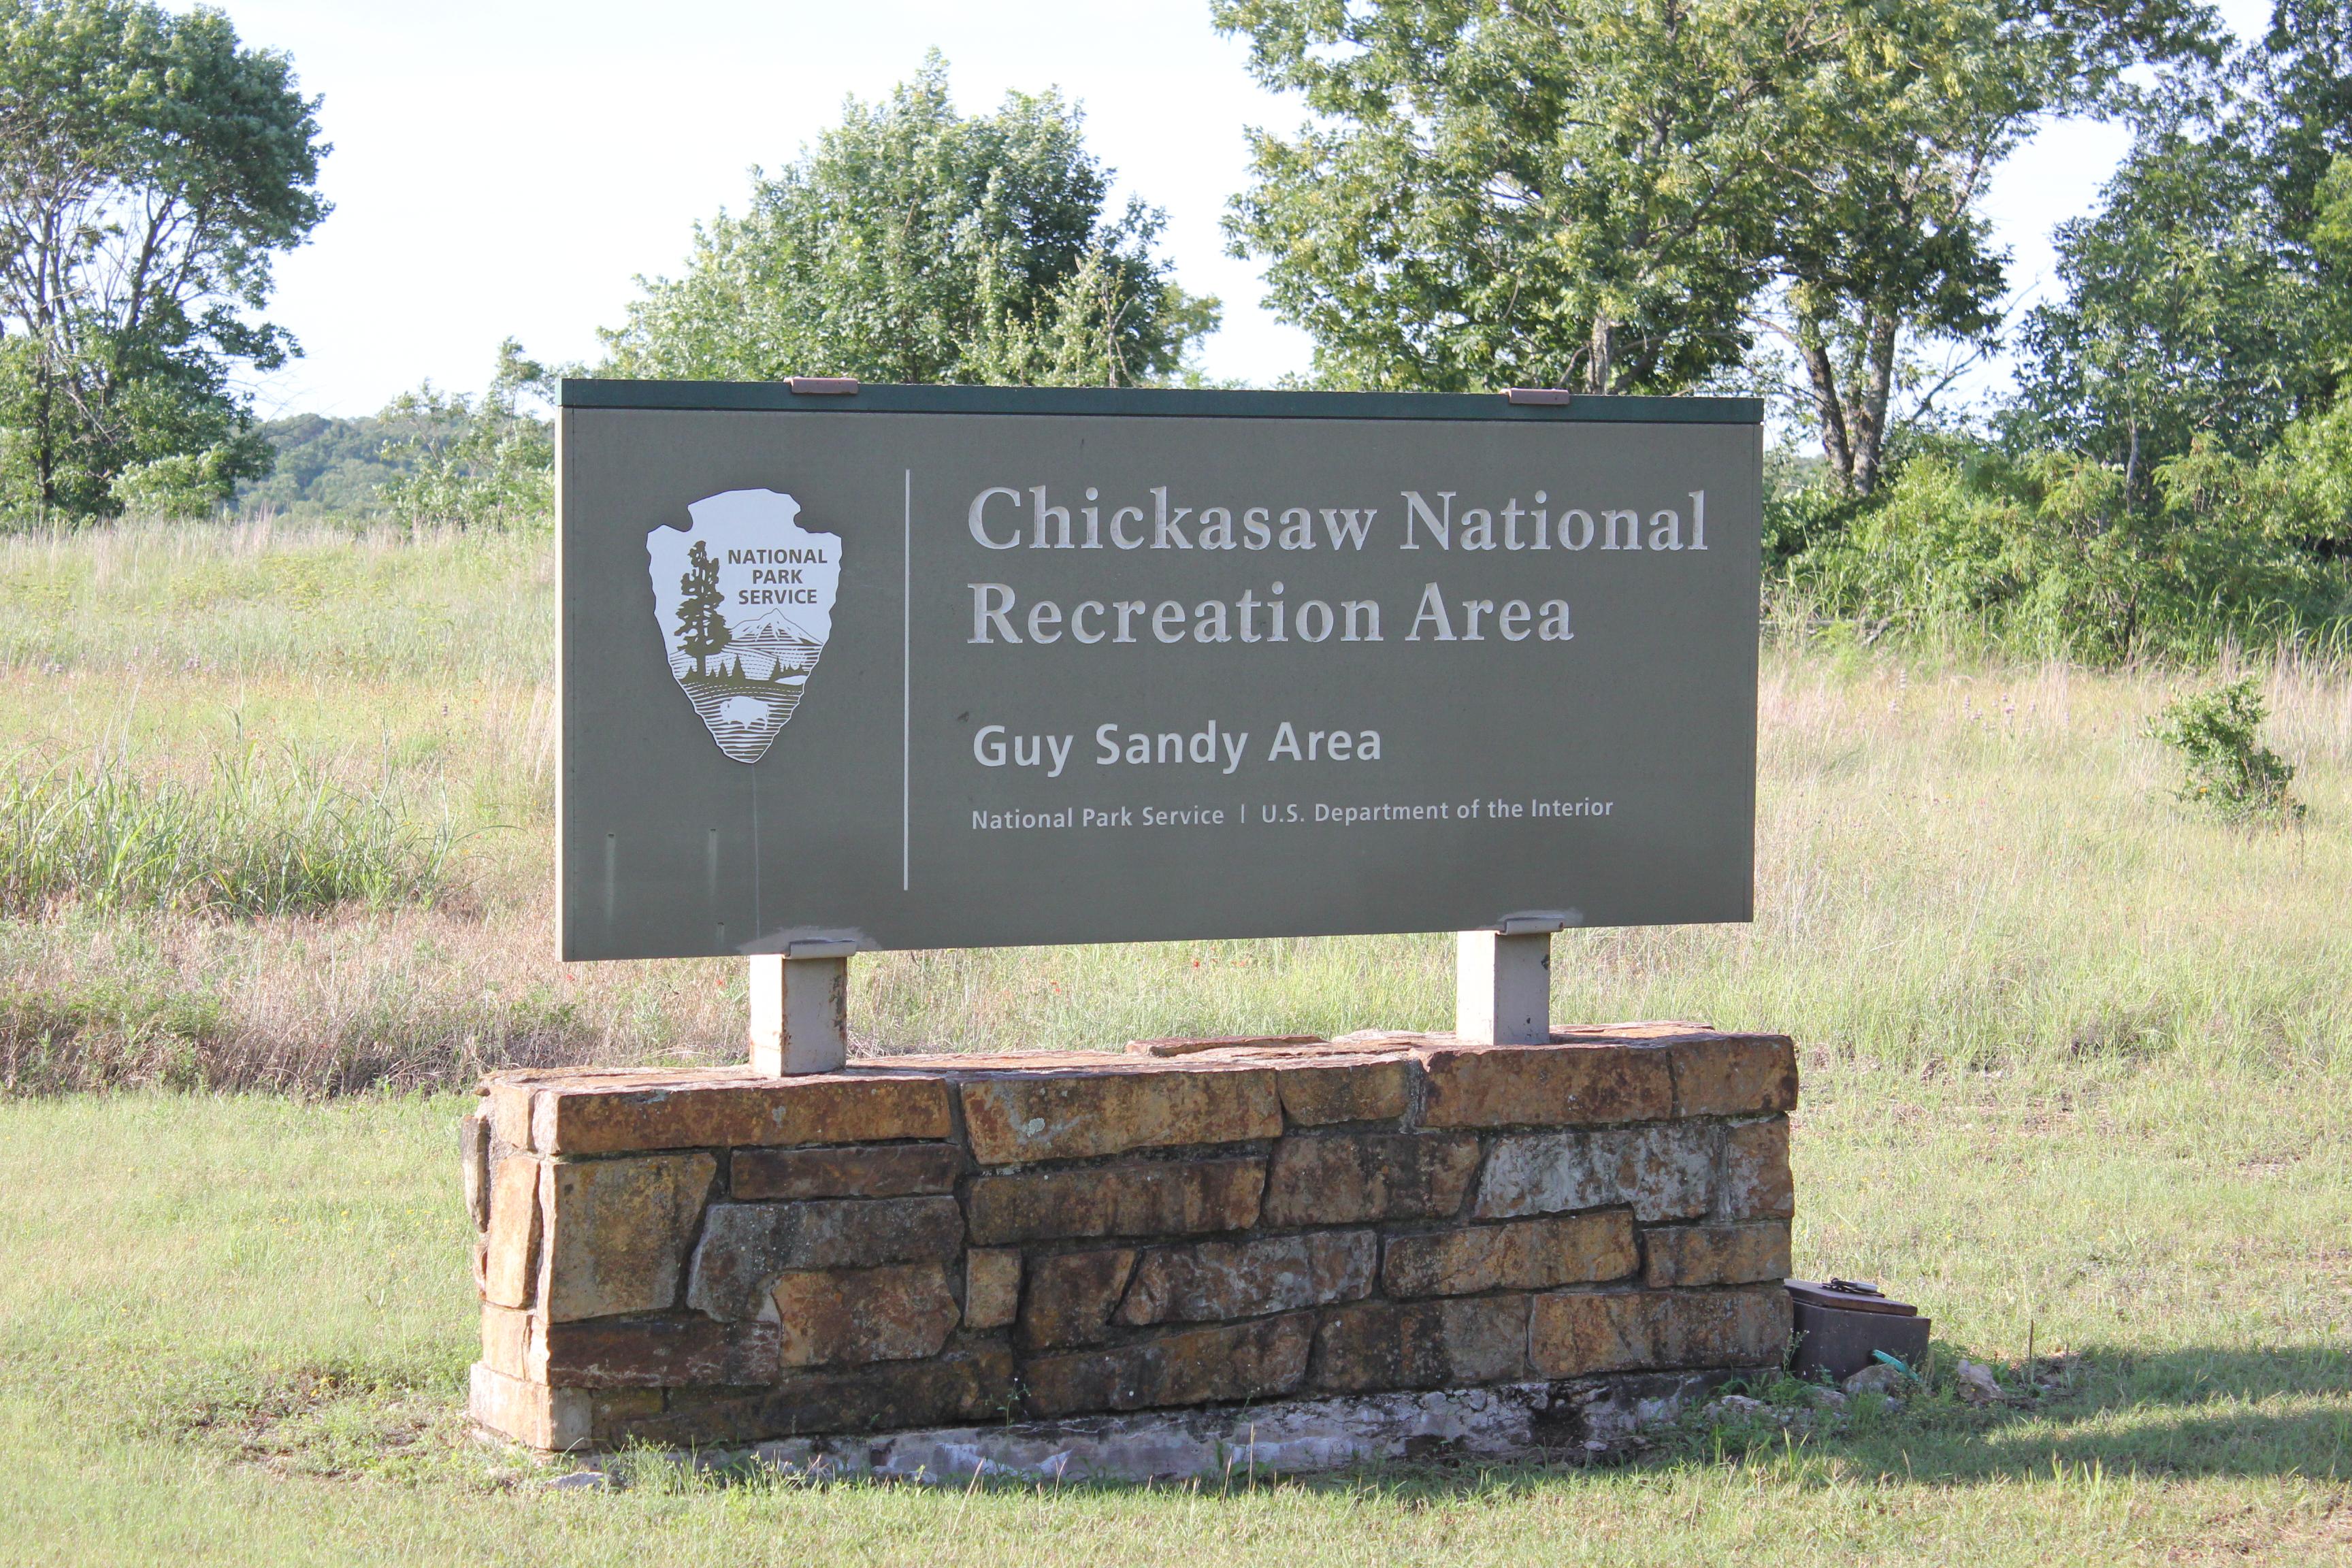 A park entrance sign for the Guy Sandy area at Chickasaw National Recreation Area